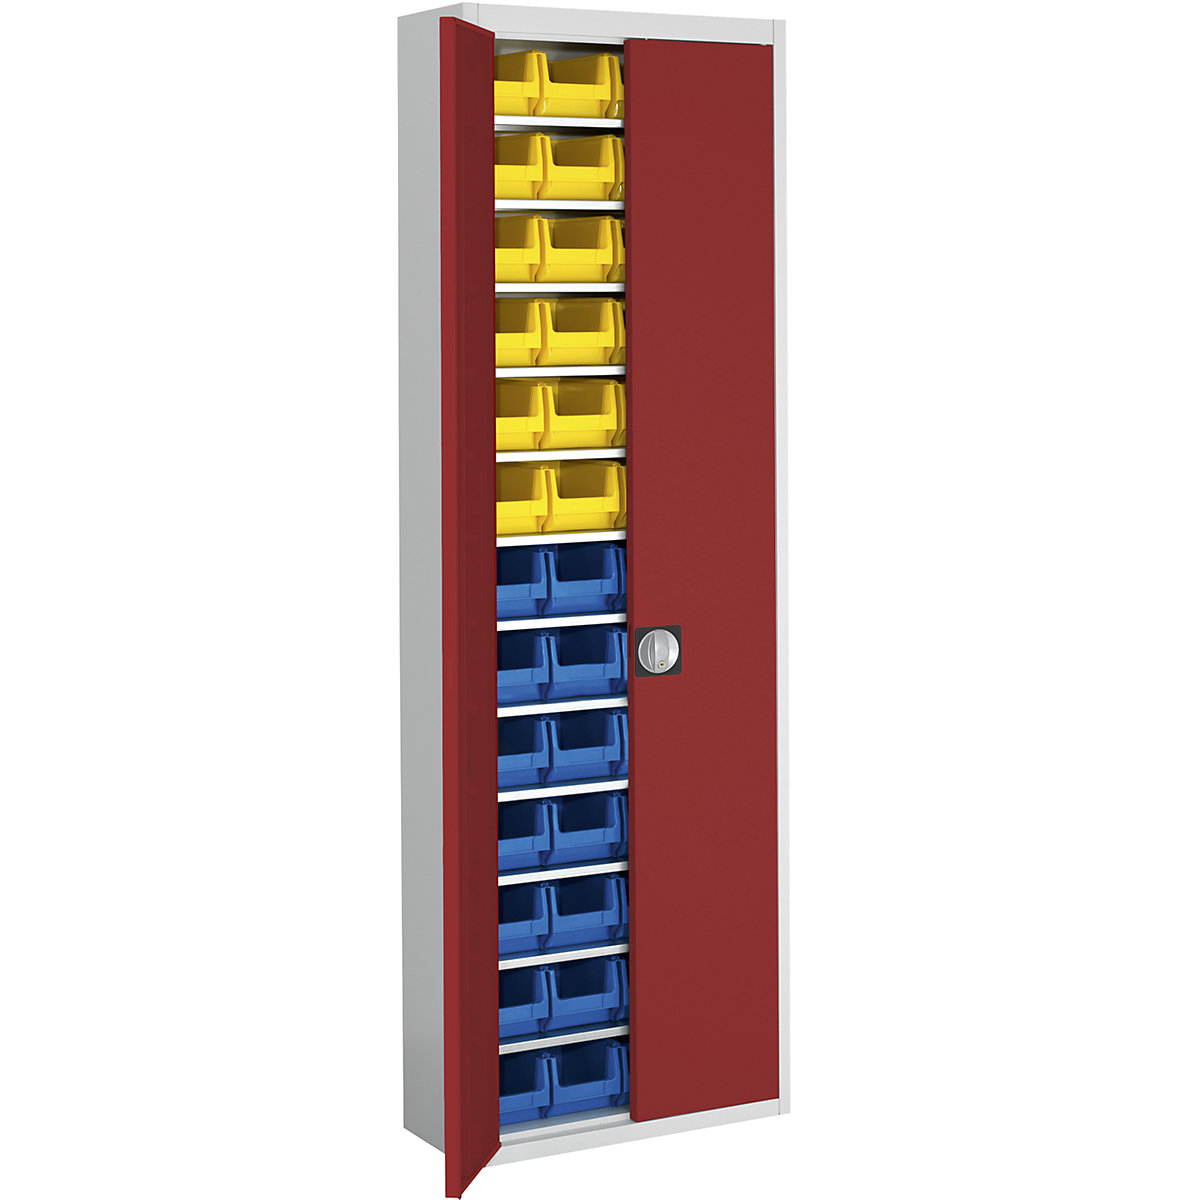 Storage cupboard with open fronted storage bins – mauser, HxWxD 2150 x 680 x 280 mm, two-colour, grey body, red doors, 52 bins-15